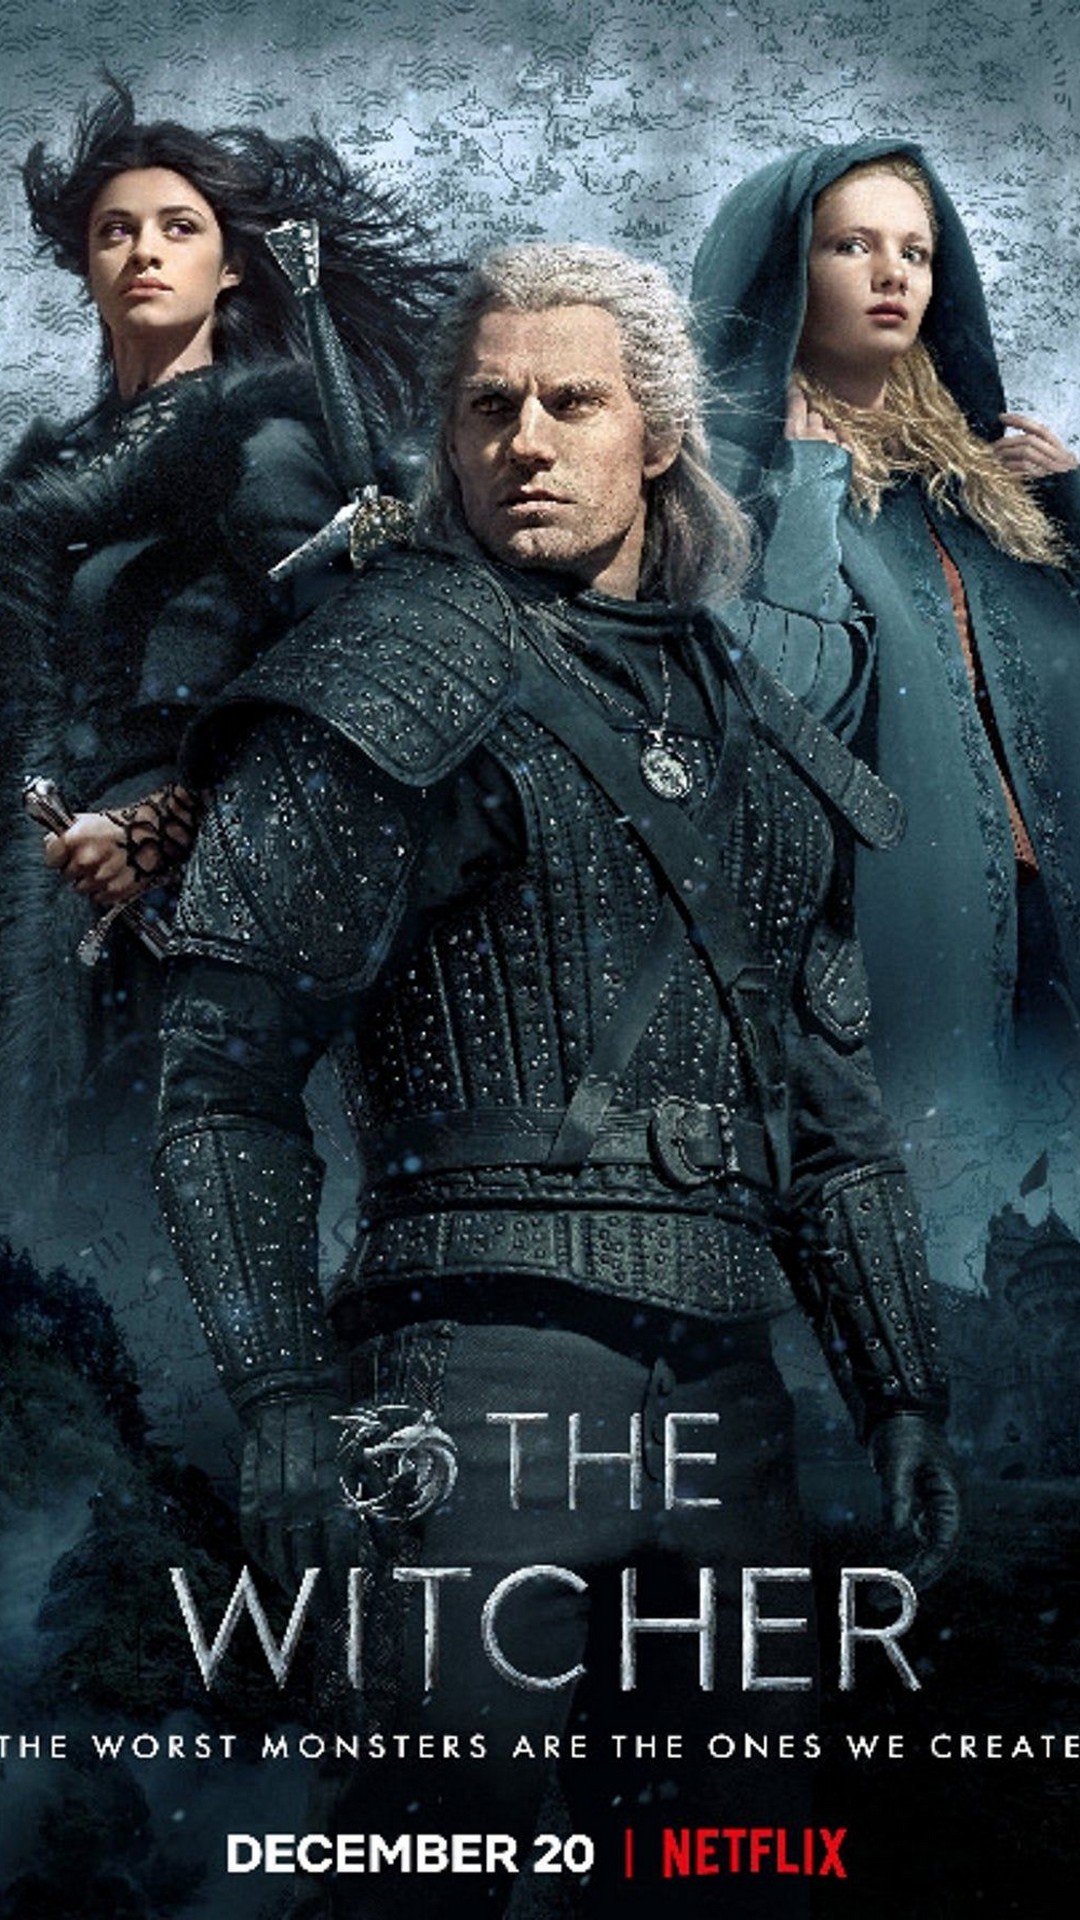 The Witcher iPhone X Wallpaper With high-resolution 1080X1920 pixel. You can use this wallpaper for your iPhone 5, 6, 7, 8, X, XS, XR backgrounds, Mobile Screensaver, or iPad Lock Screen